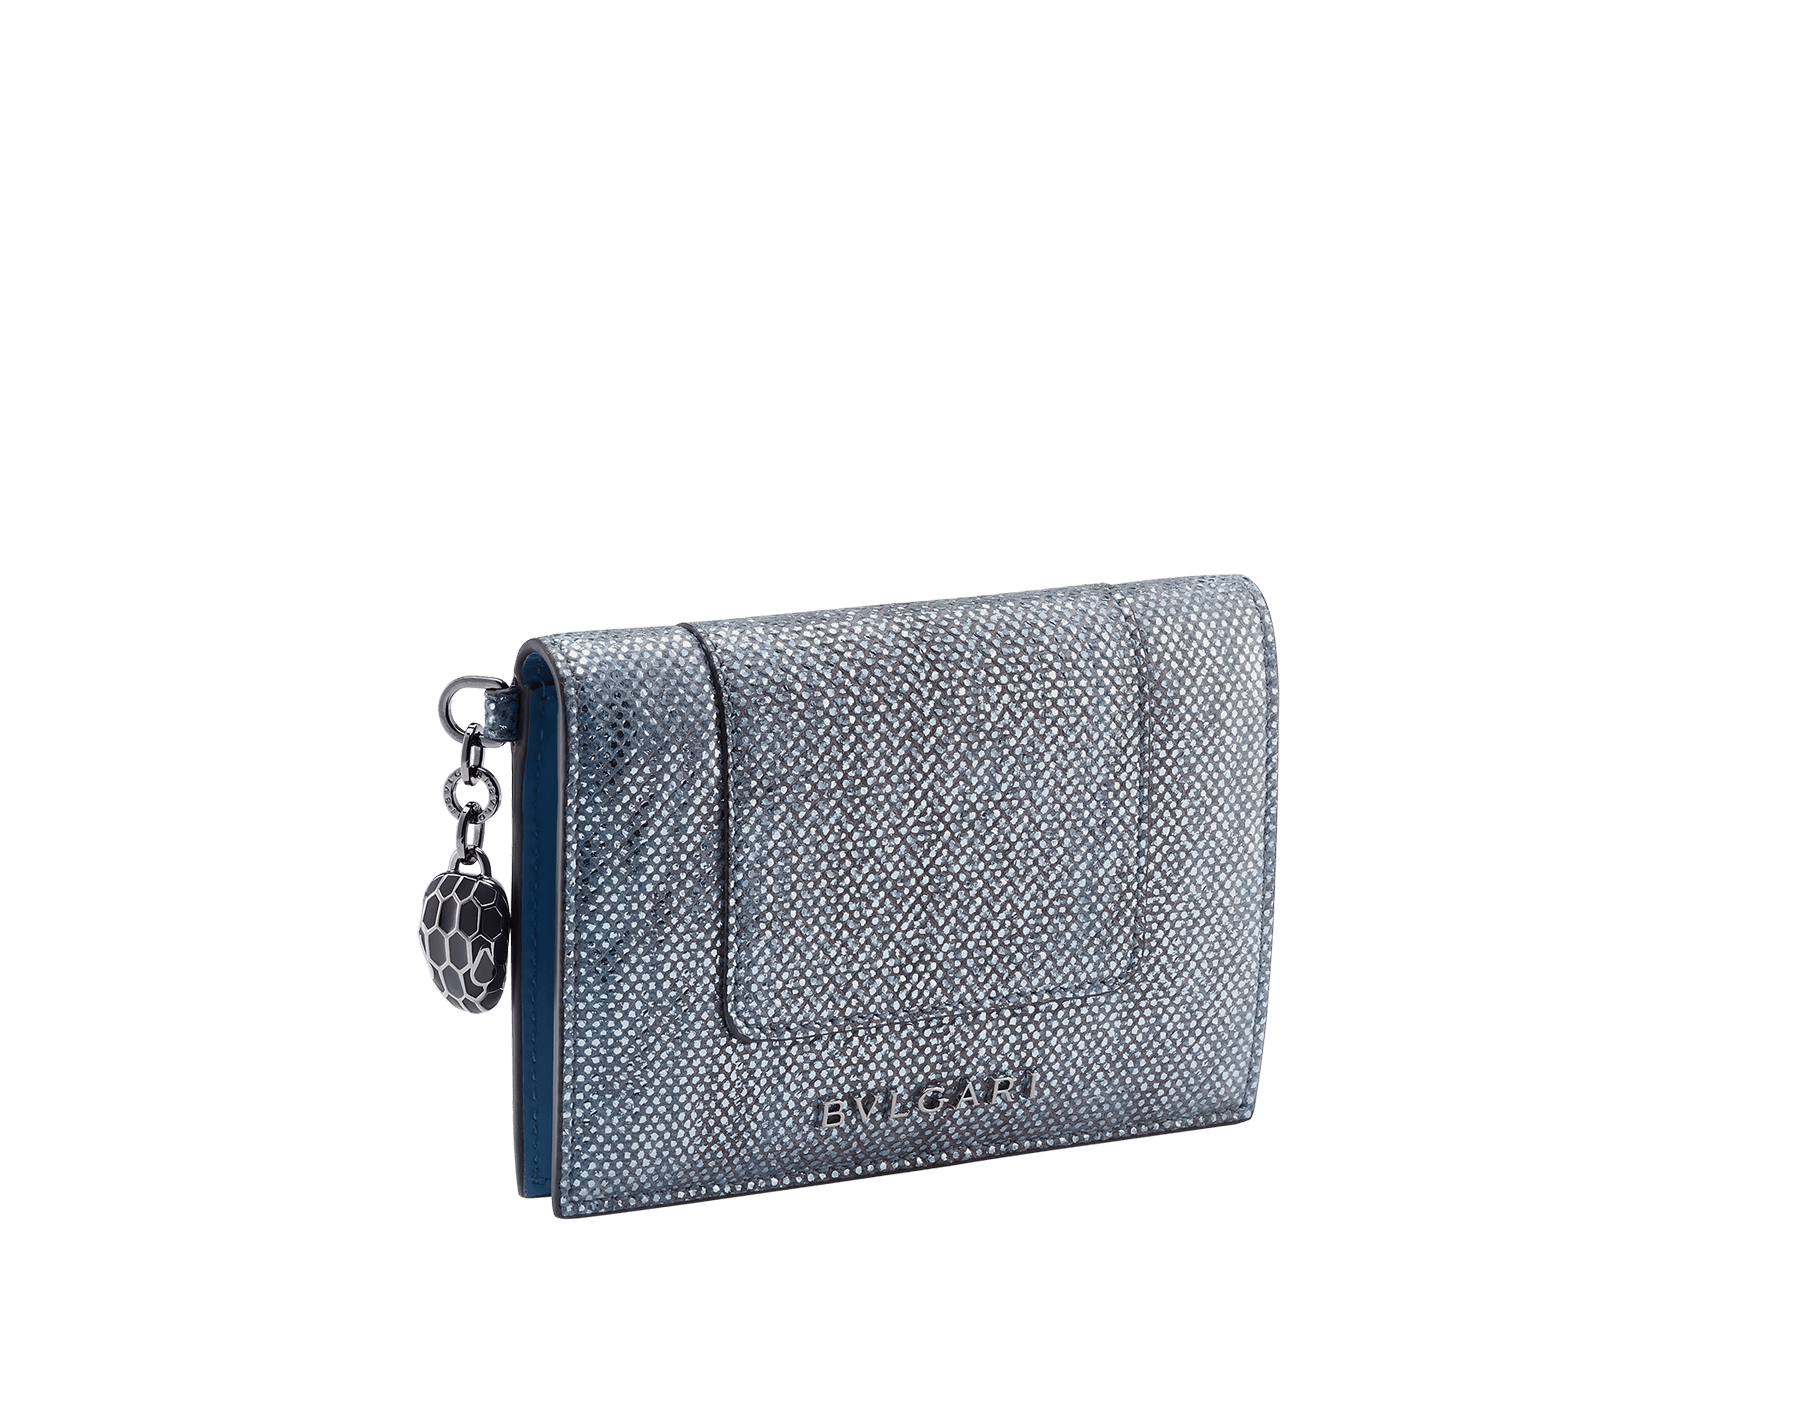 "Serpenti Forever" folded card holder in multicolour "Shaded" karung skin and Aquamarine light blue calf leather. Tempting palladium-plated brass snakehead charm, finished with pearled lilac and matte Aquamarine light blue enamel, and black enamel eyes. SEA-CC-HOLDER-FOLD-MKa image 1